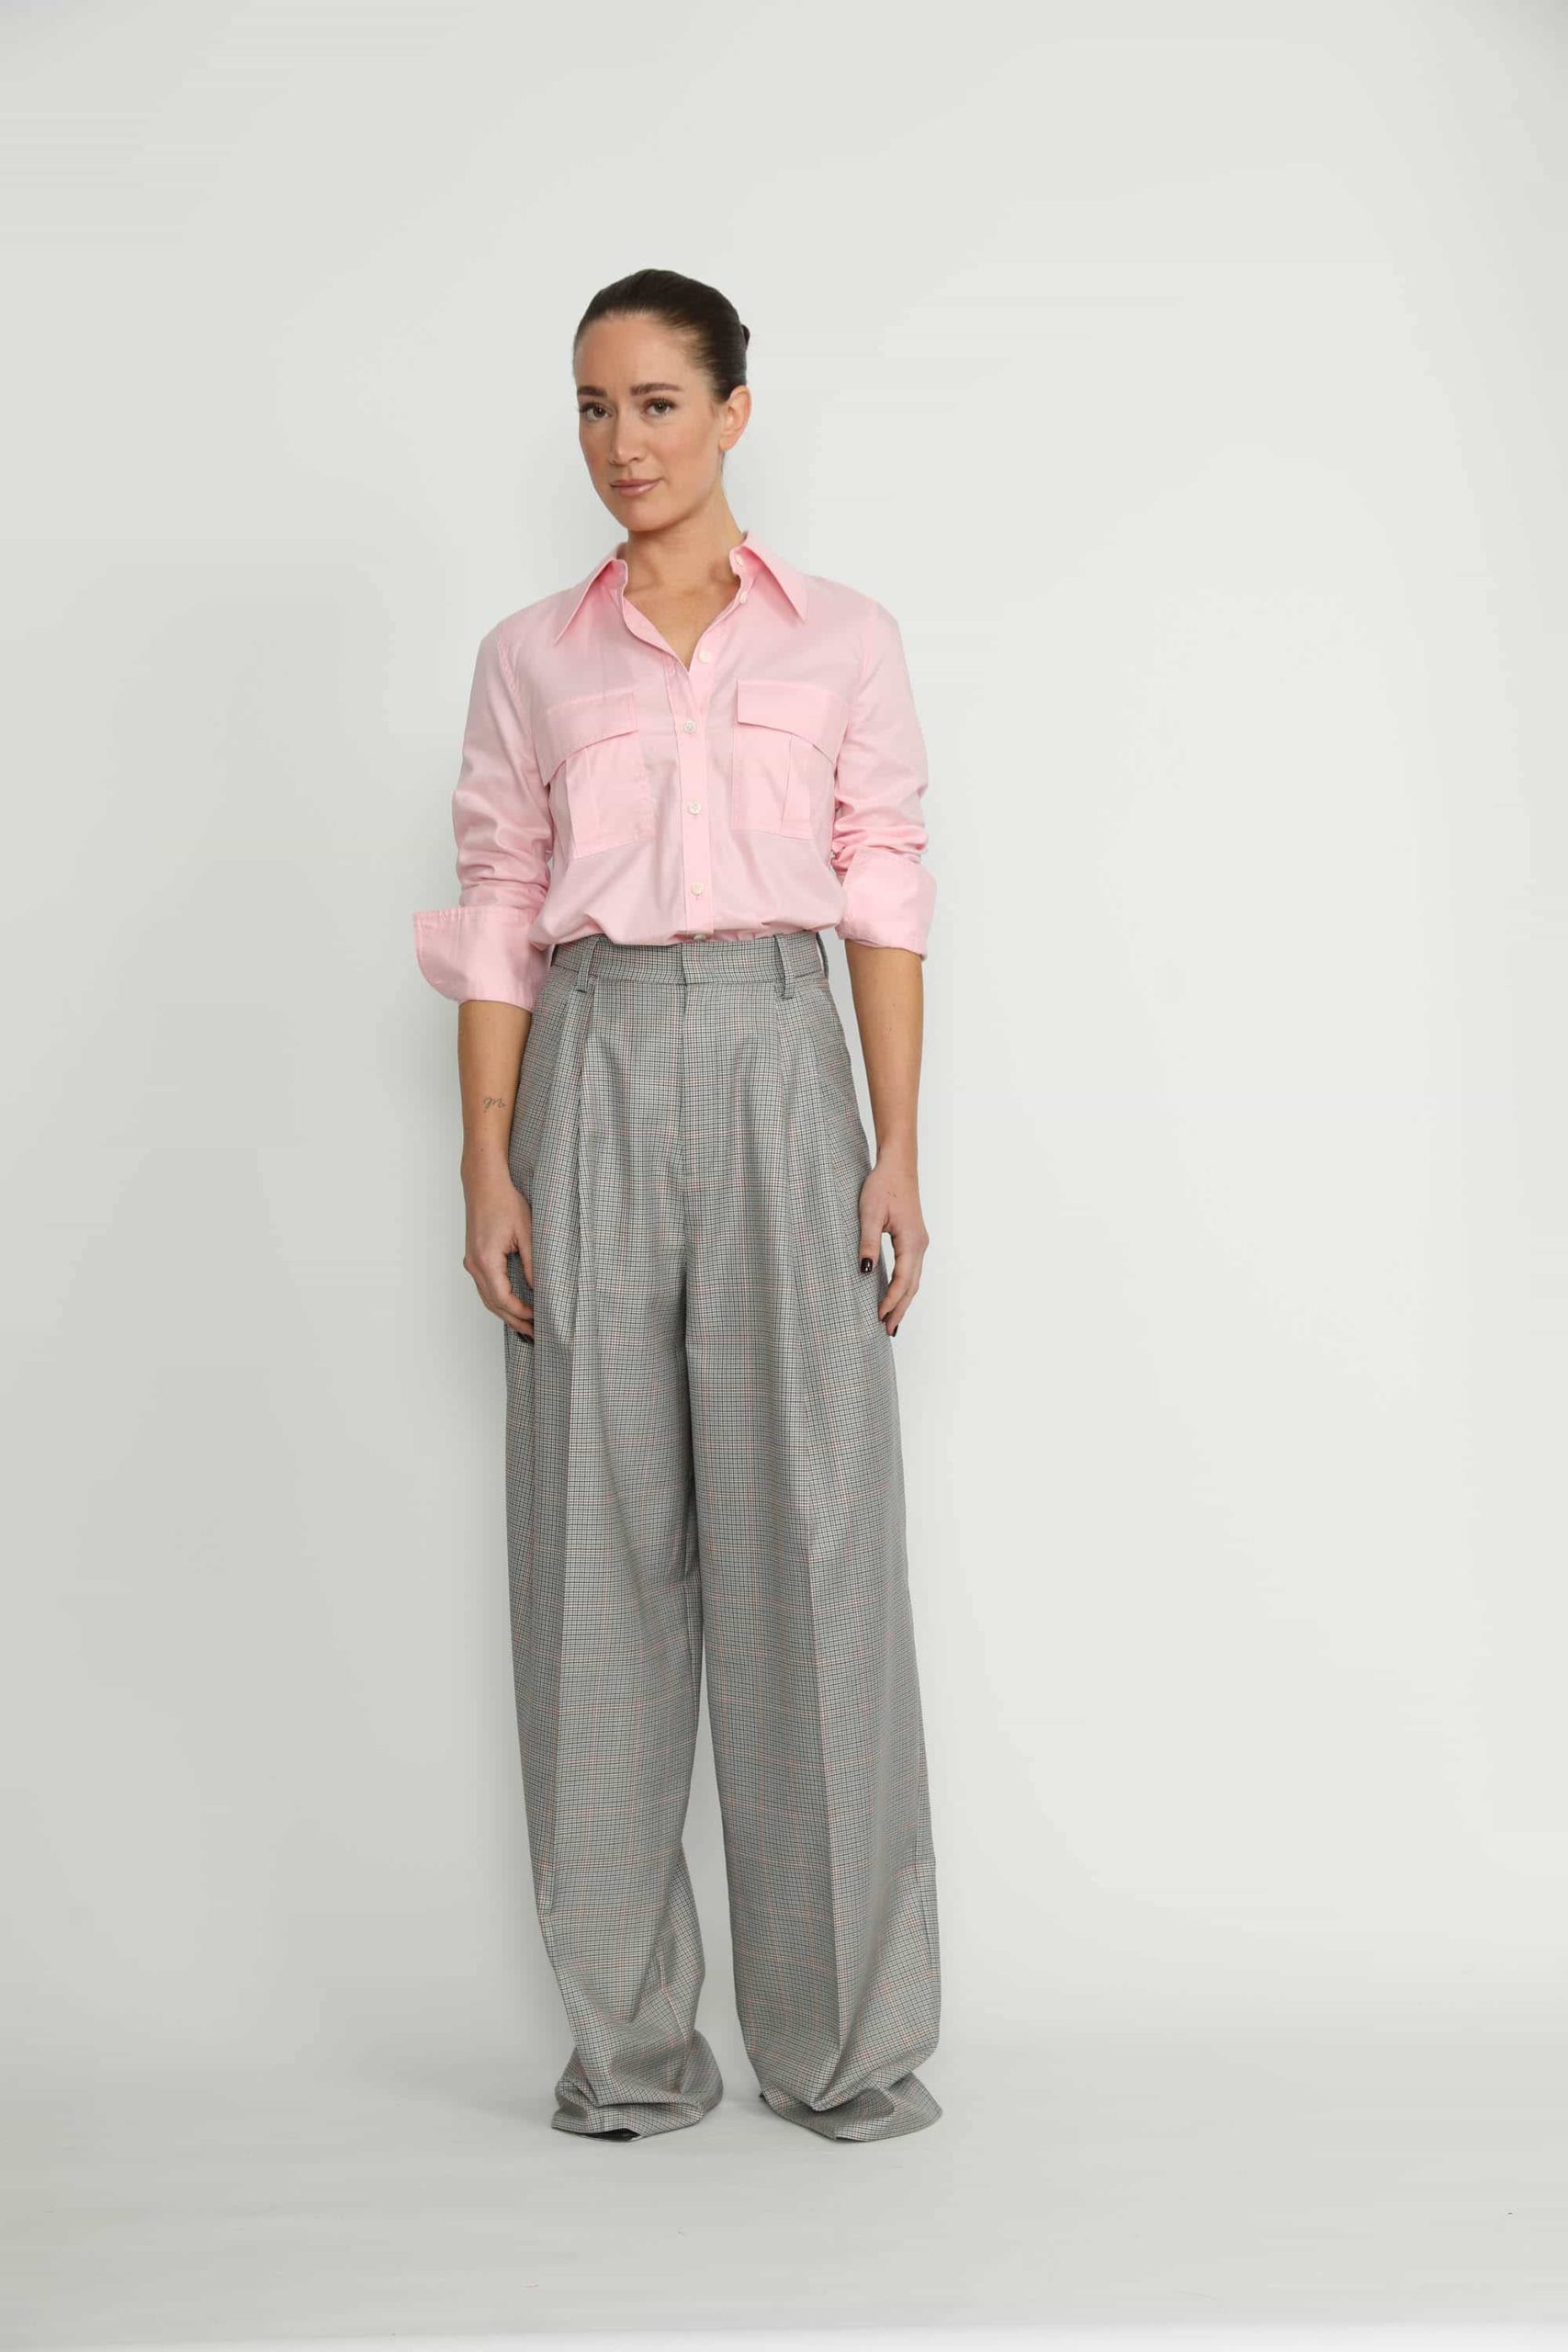 Siena Trousers – Sienna Wide Leg Trousers in Grey Princess Check